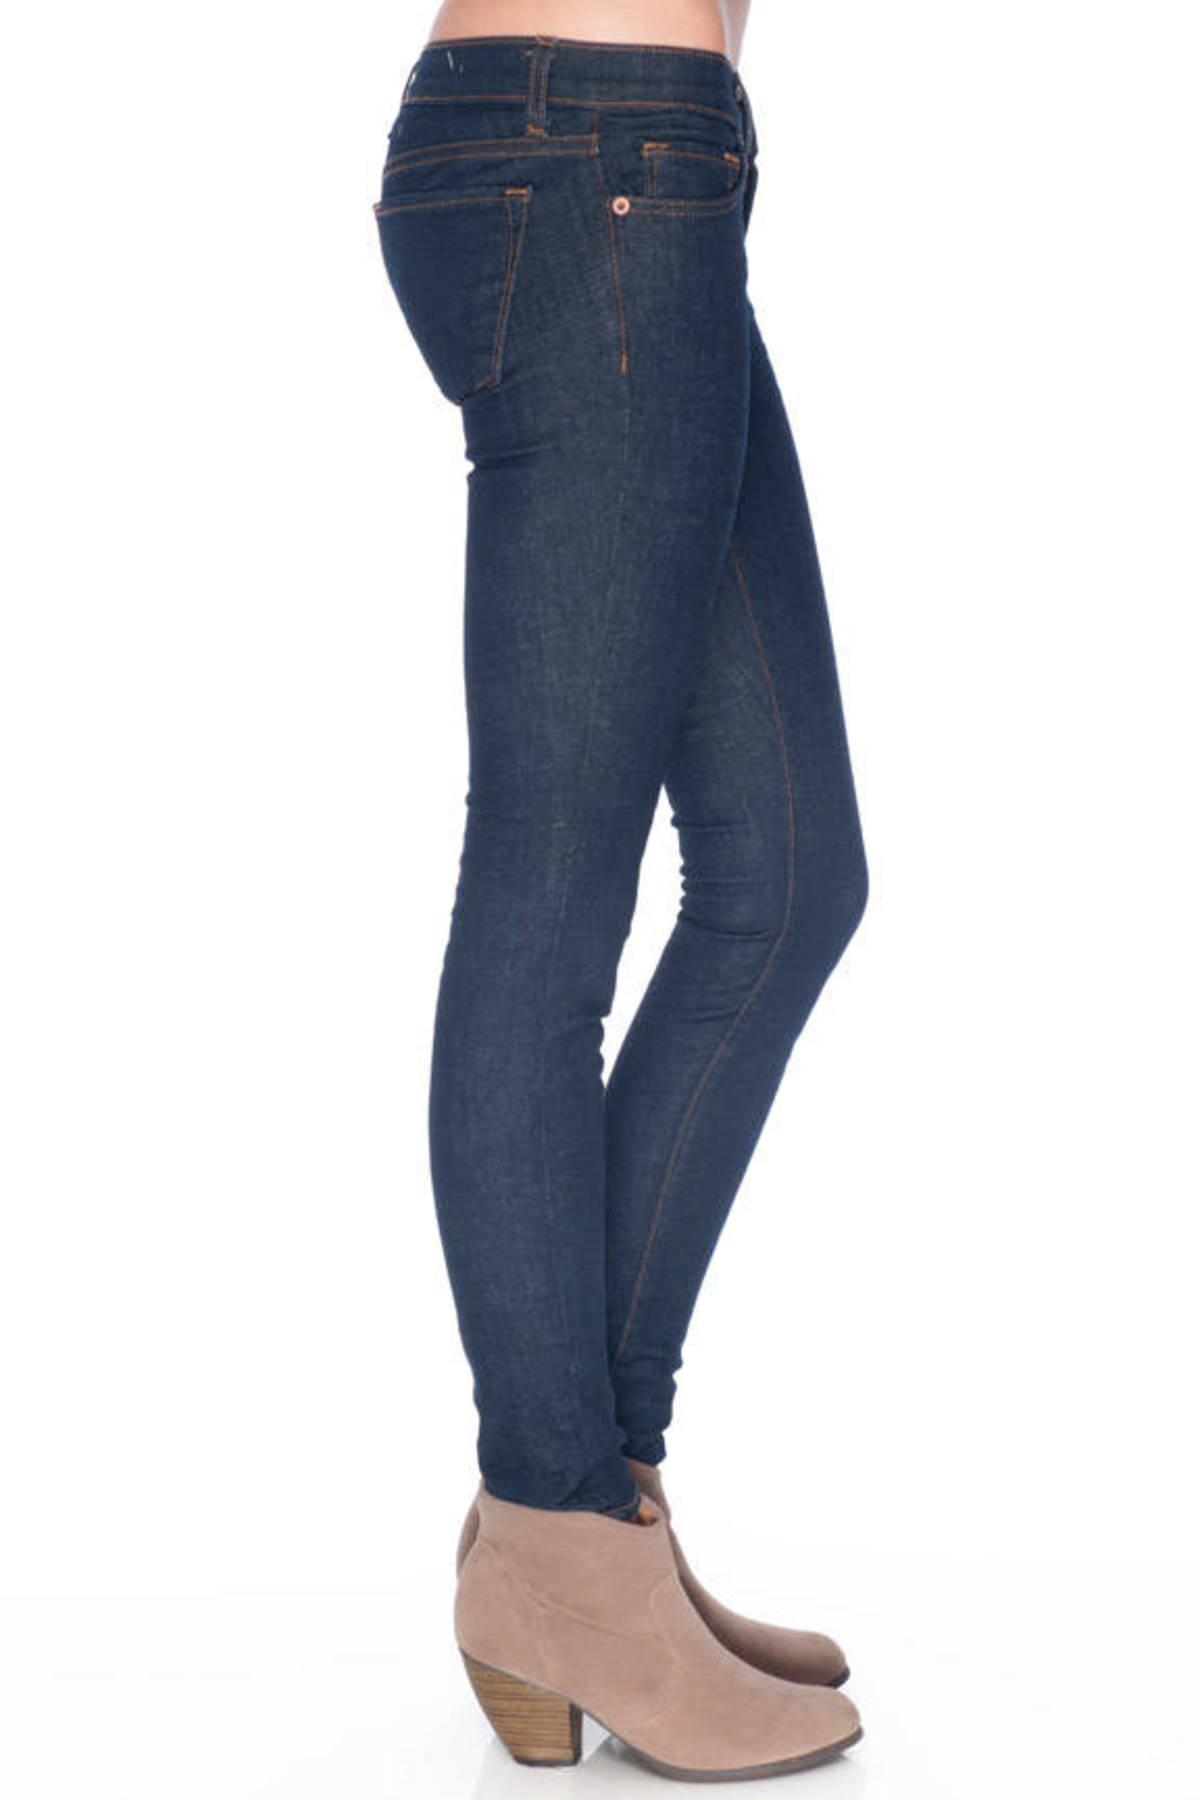 10 Lowrise Skinny Ankle Jeans 910 In Pure 101 Tobi Us